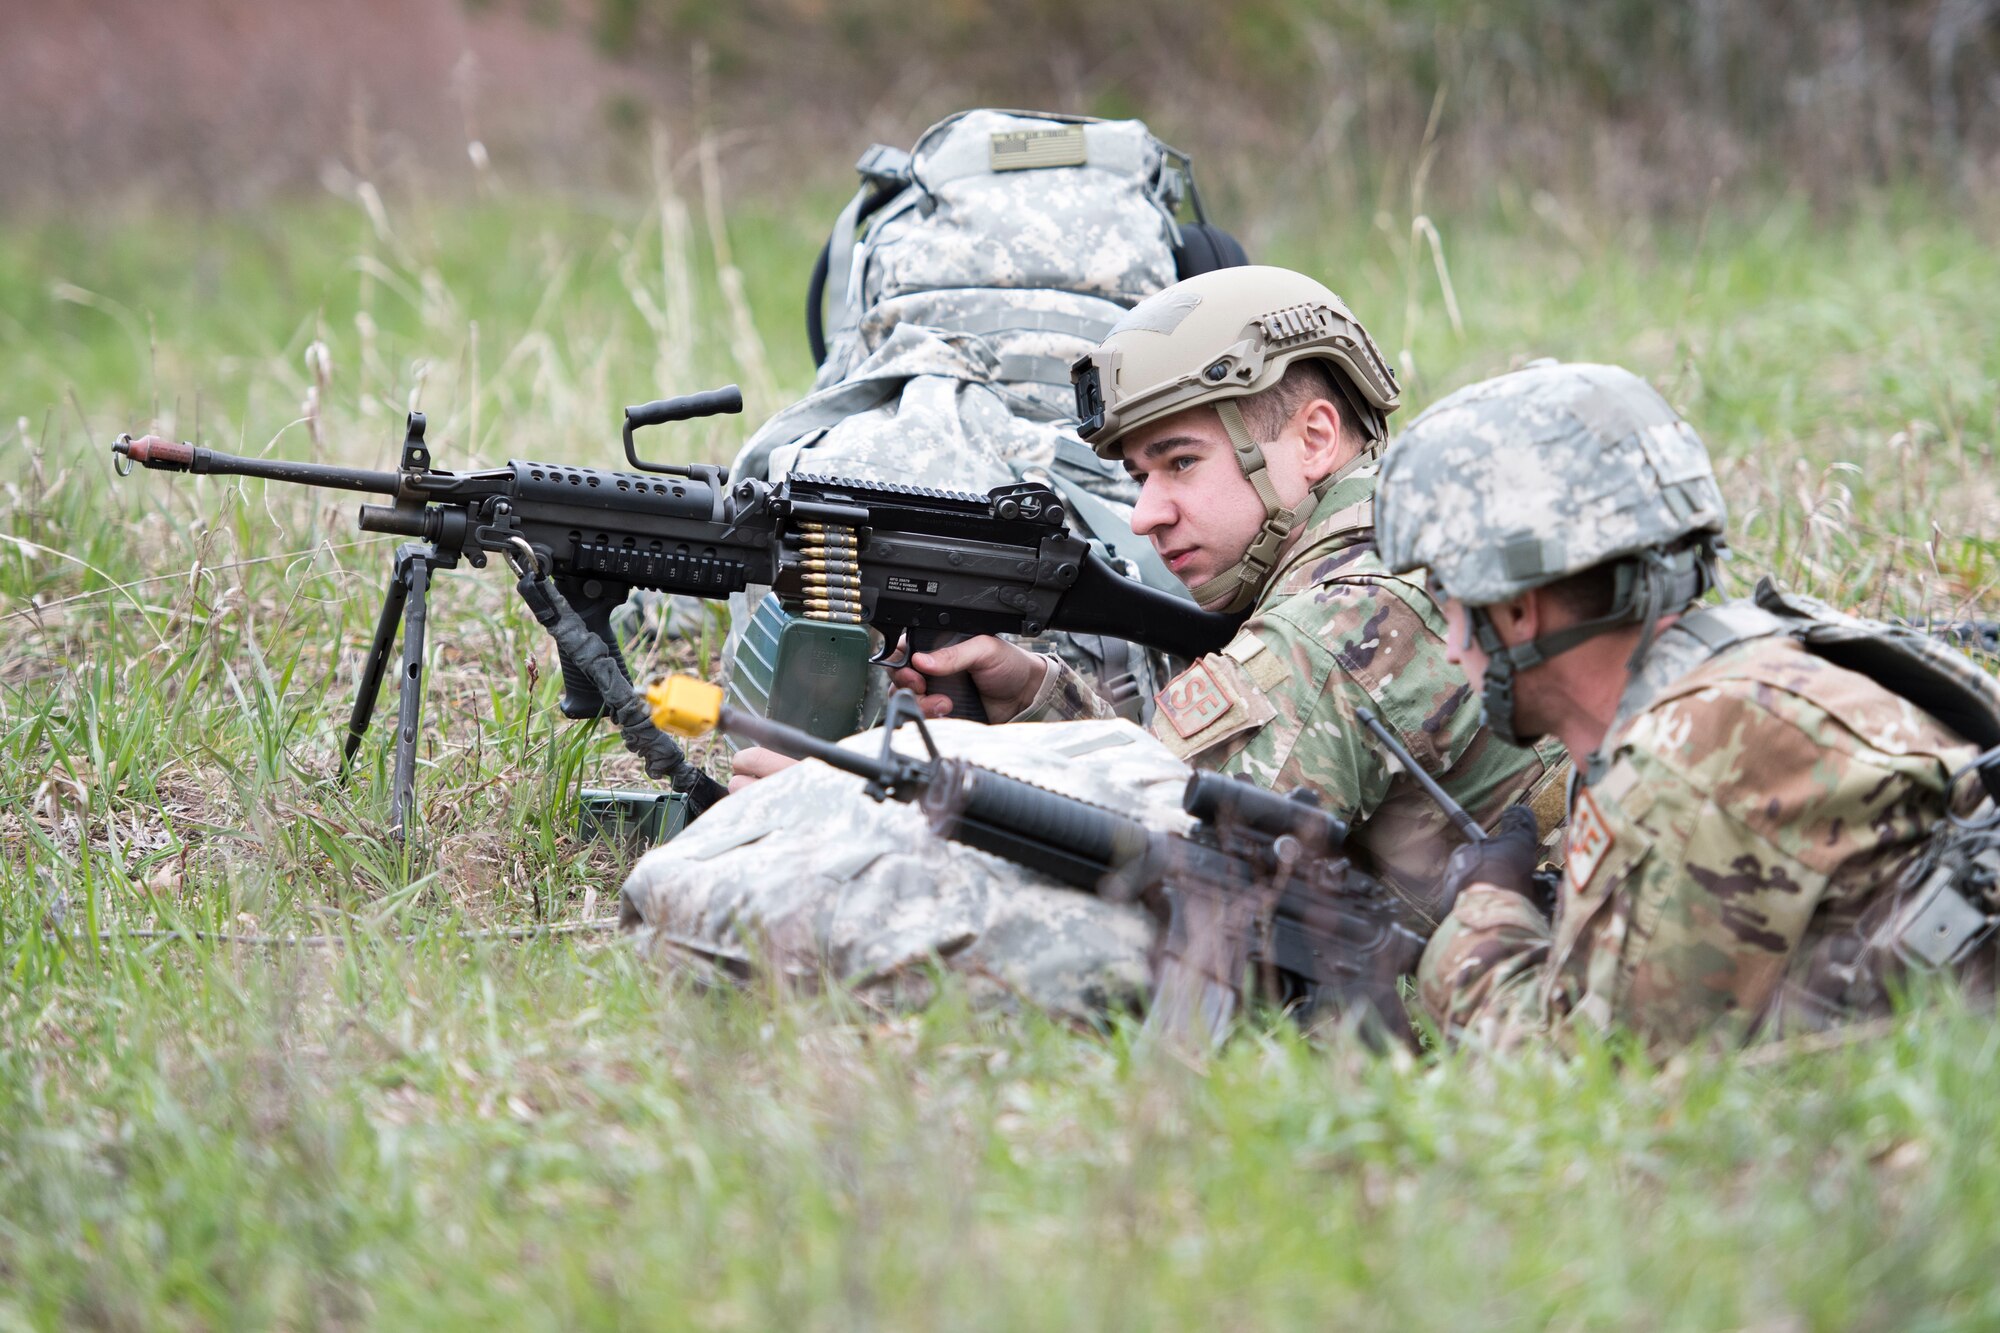 Defenders assigned to the 167th Security Forces Squadron participate in a training exercise at Alpena Combat Readiness Training Center, Alpena, Mich., May 7, 2019. Approximately 300 167th AW Airmen participated in the training event. (U.S. Air National Guard photo by Tech. Sgt. Jodie Witmer)